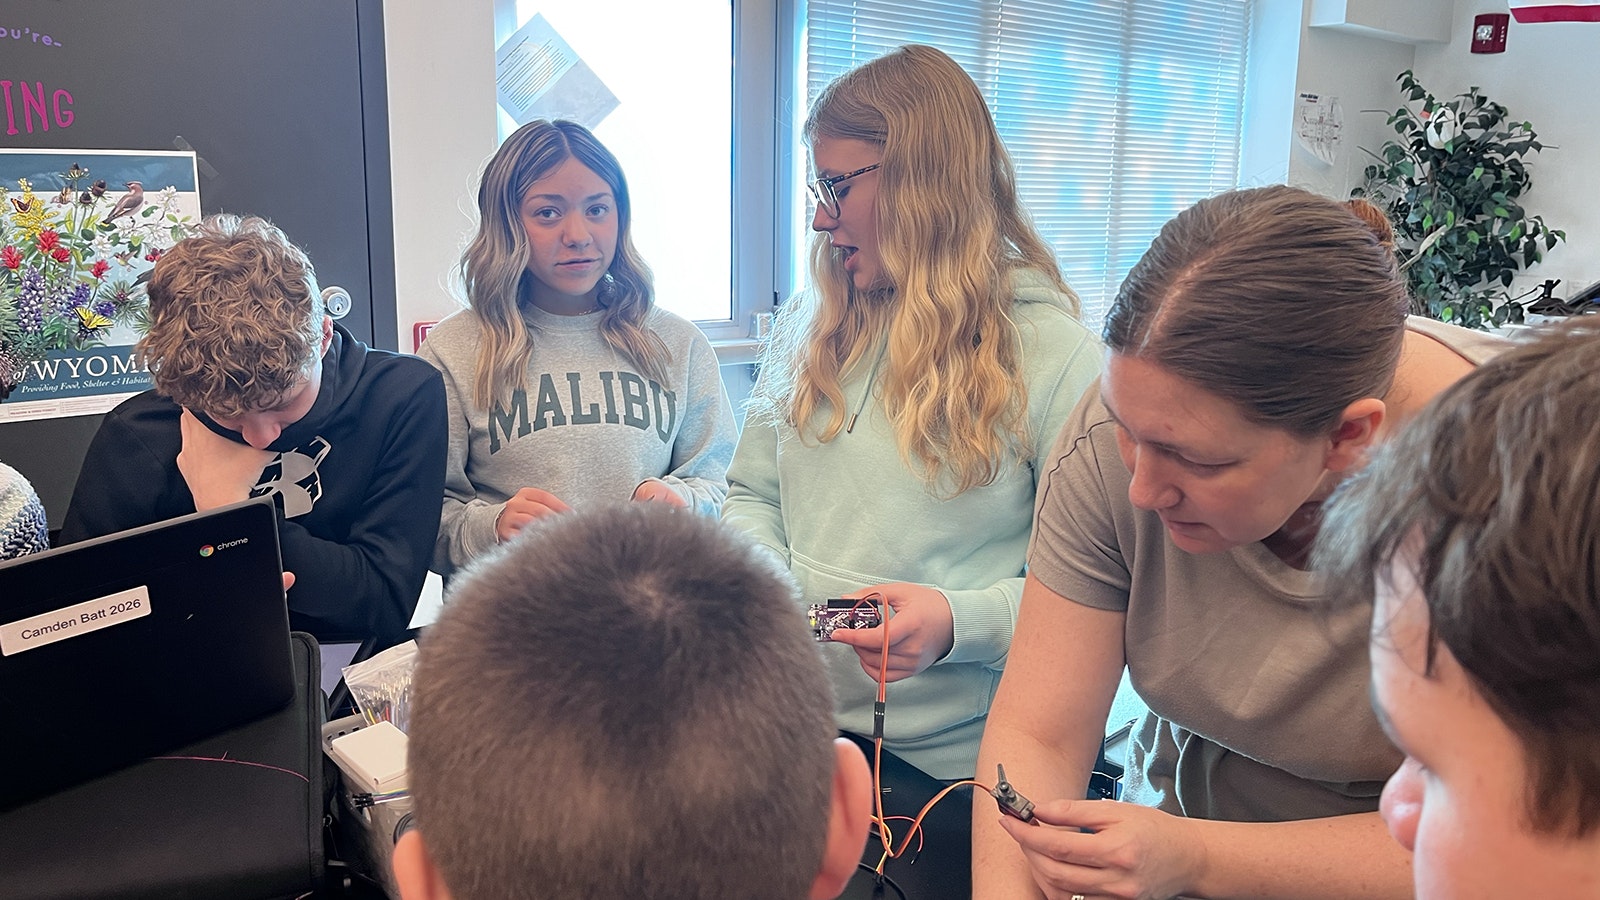 After winning this year's NASA TechRise Student Challenge, a group of Evanston eighth graders are now working with scientists and engineers with the space agency to test their thermal moon mapping technology.